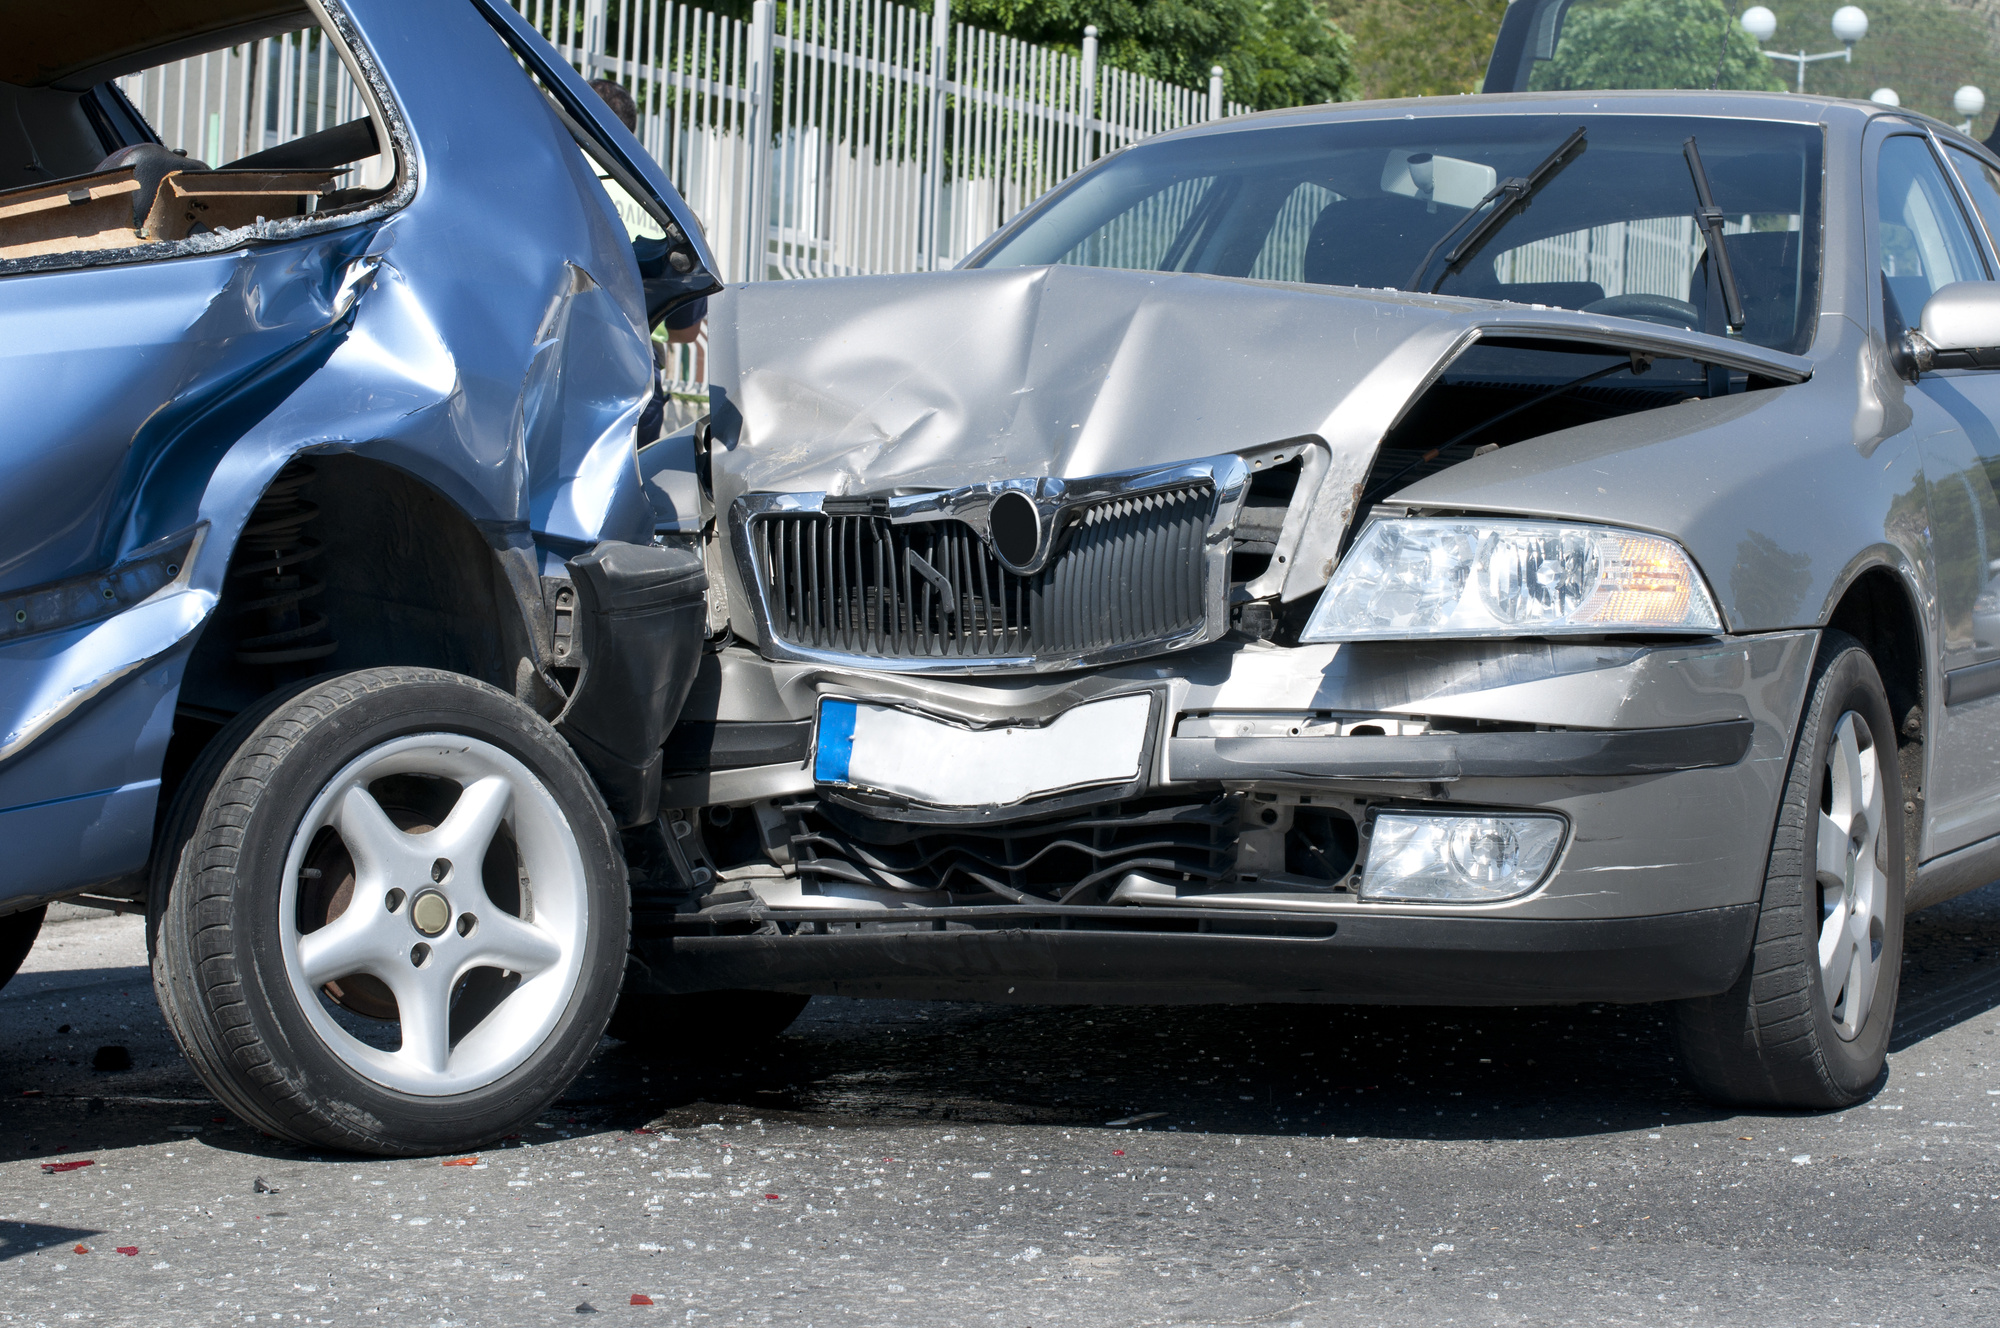 Tips to Avoid Rideshare Accidents